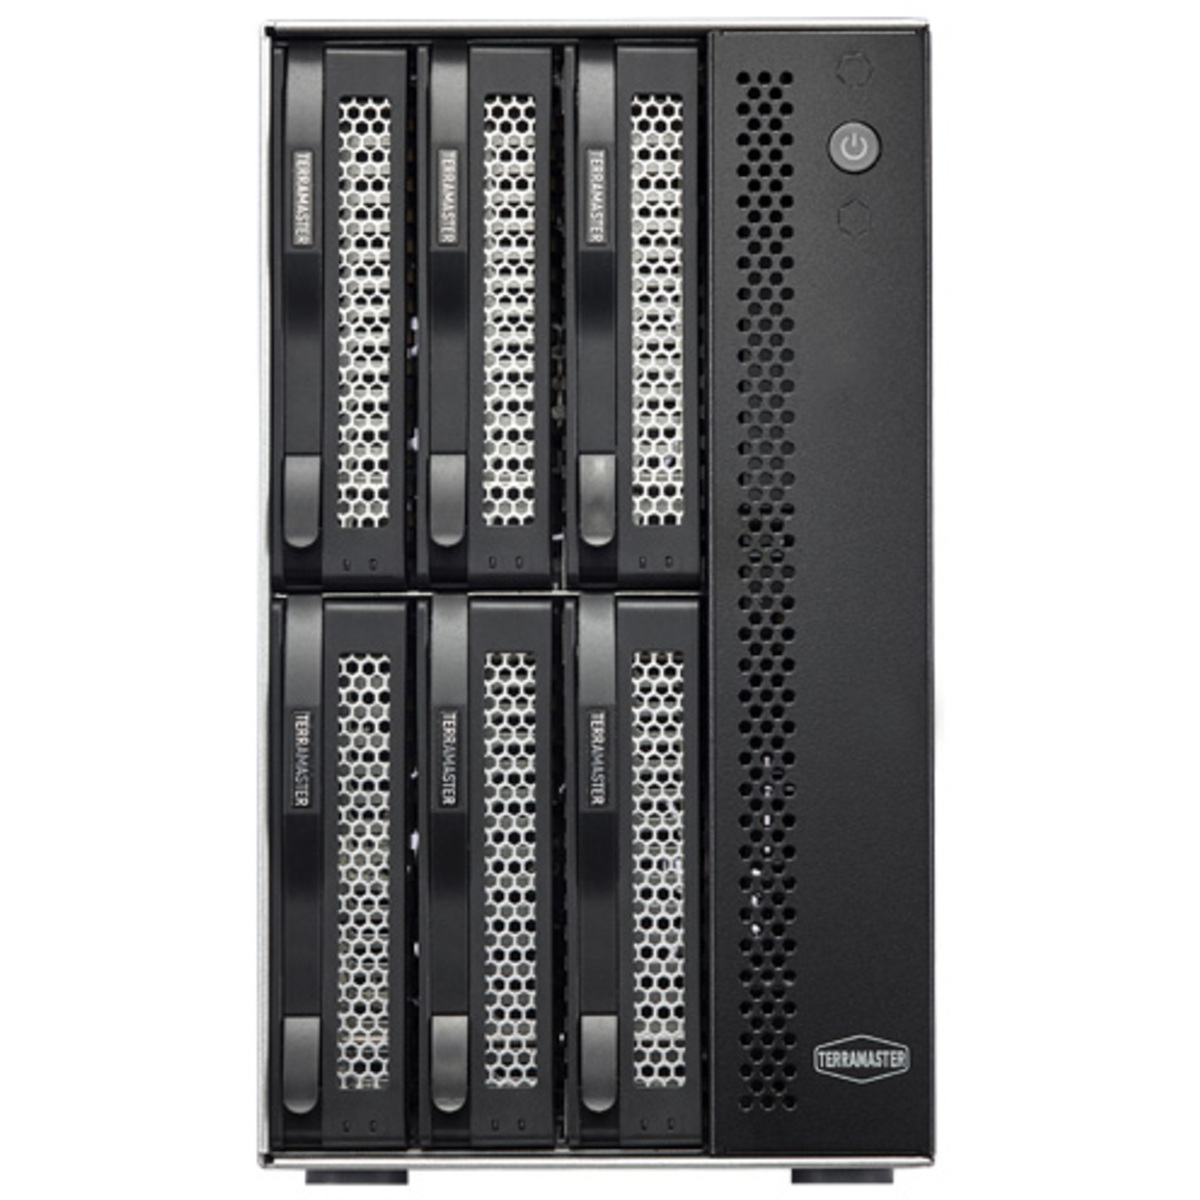 TerraMaster T6-423 50tb 6-Bay Desktop Multimedia / Power User / Business NAS - Network Attached Storage Device 5x10tb Seagate IronWolf ST10000VN000 3.5 7200rpm SATA 6Gb/s HDD NAS Class Drives Installed - Burn-In Tested - FREE RAM UPGRADE T6-423